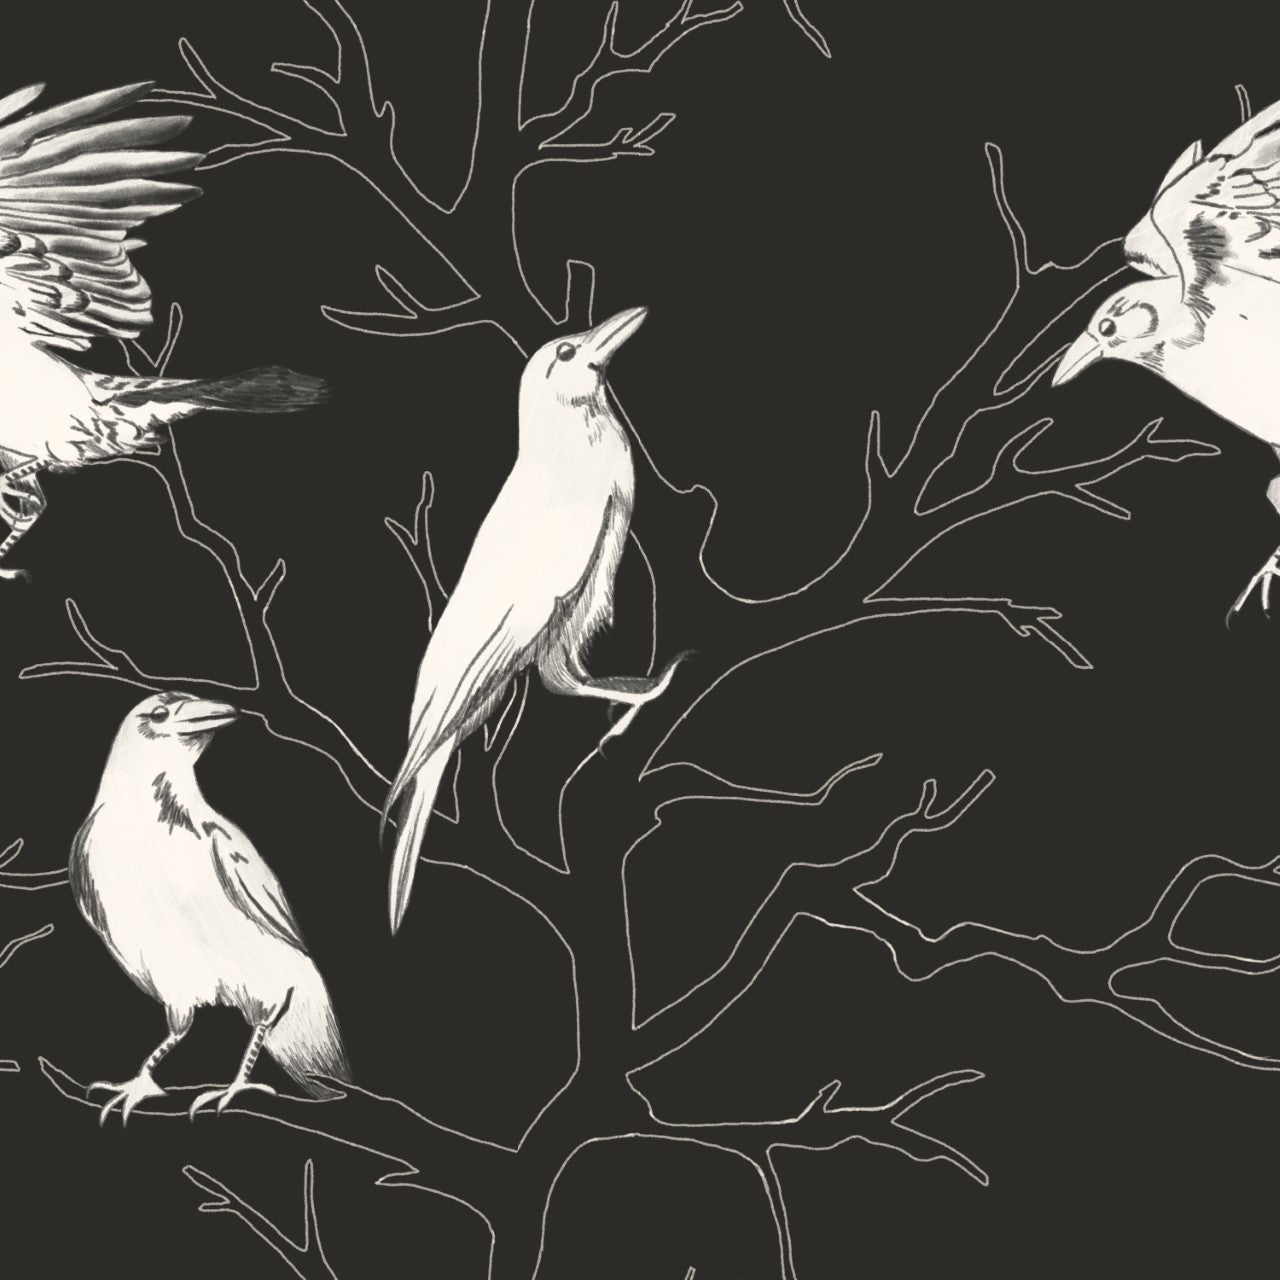 White crows and trees on black background easy to install and remove peel and stick custom wallpaper available in different lengths/sizes locally created and printed in Canada. Removable, washable, durable, commercial grade, customizable and water proof.